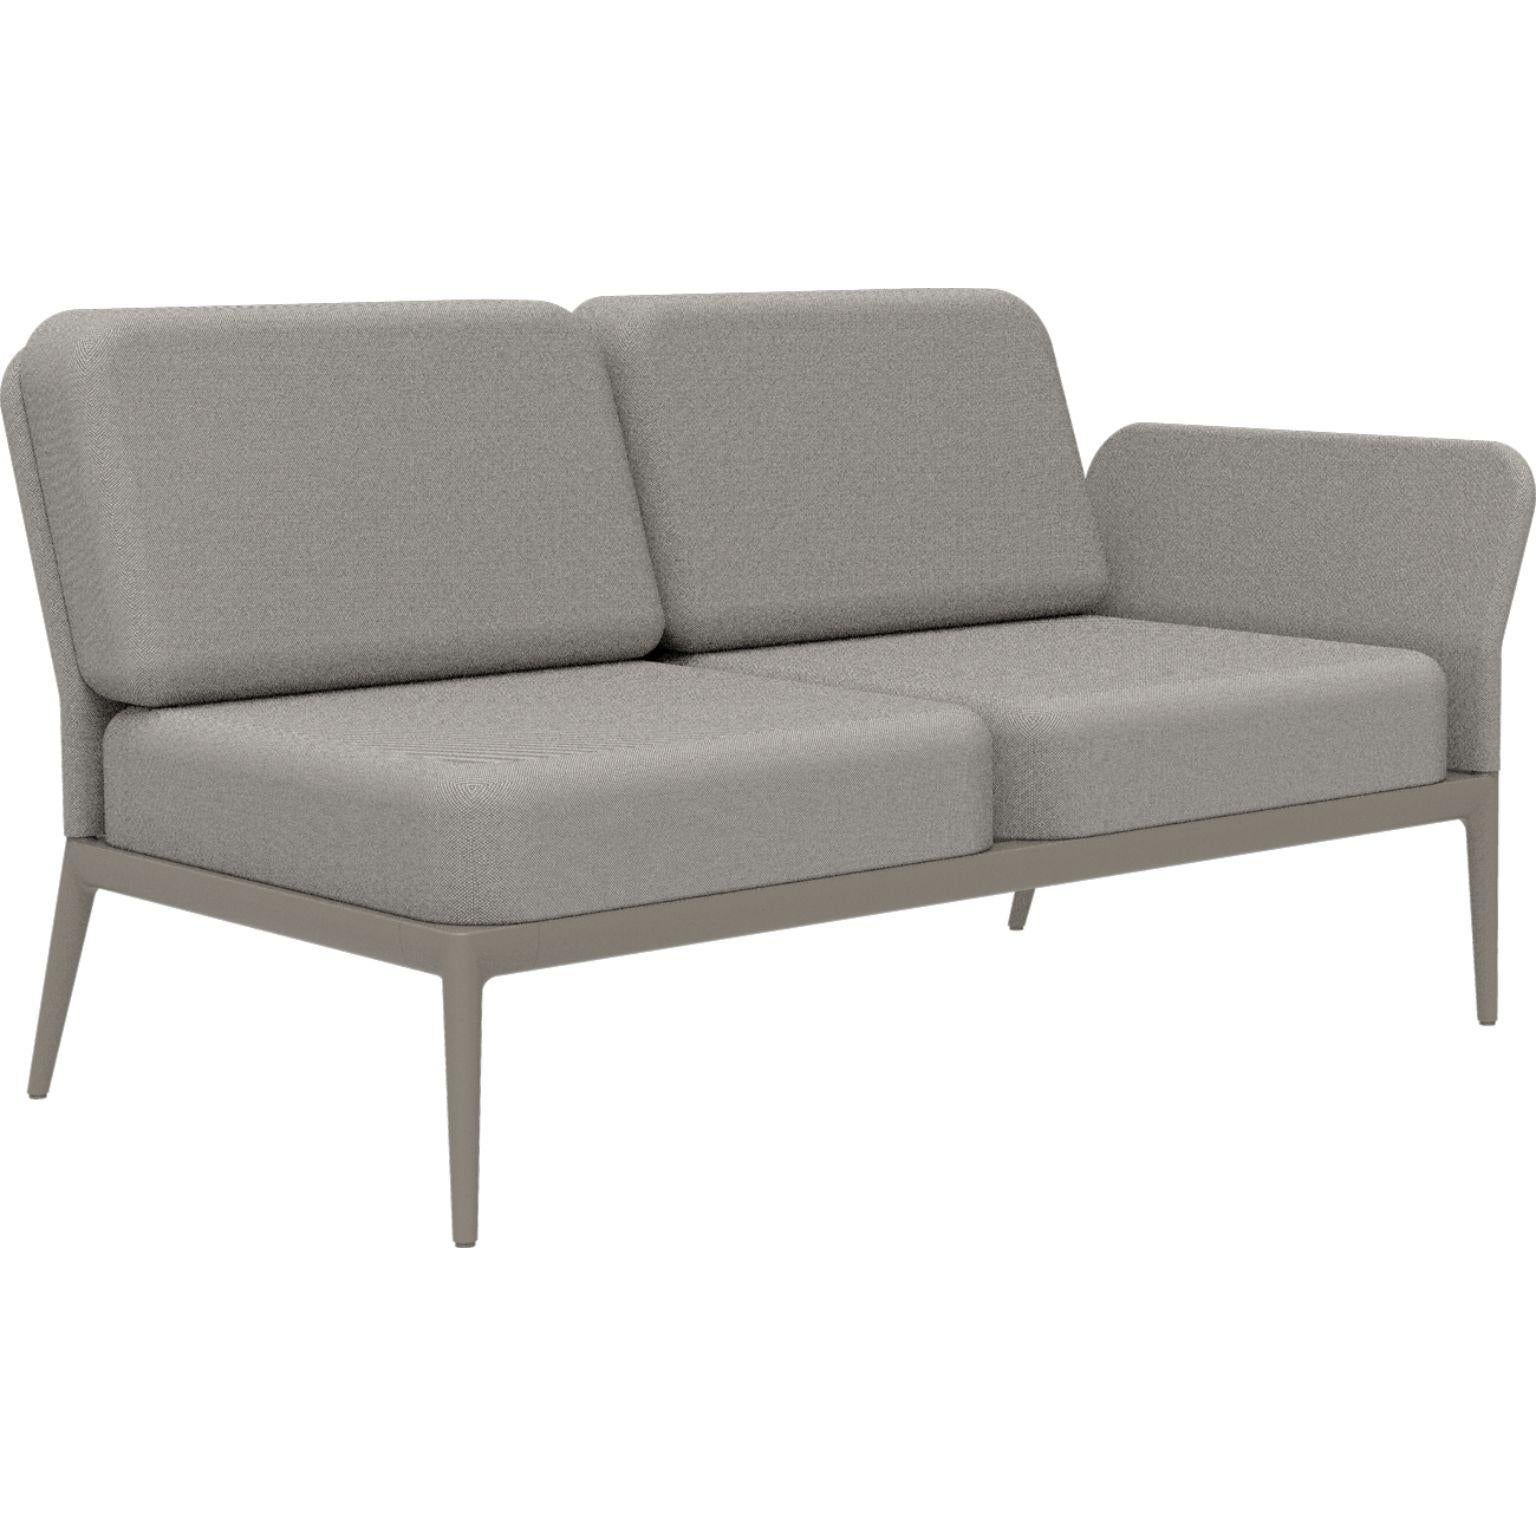 Cover Cream Double Left Modular Sofa by MOWEE
Dimensions: D83 x W148 x H81 cm (seat height 42 cm)
Material: Aluminum and upholstery.
Weight: 29 kg.
Also available in different colors and finishes. Please contact us.

An unmistakable collection